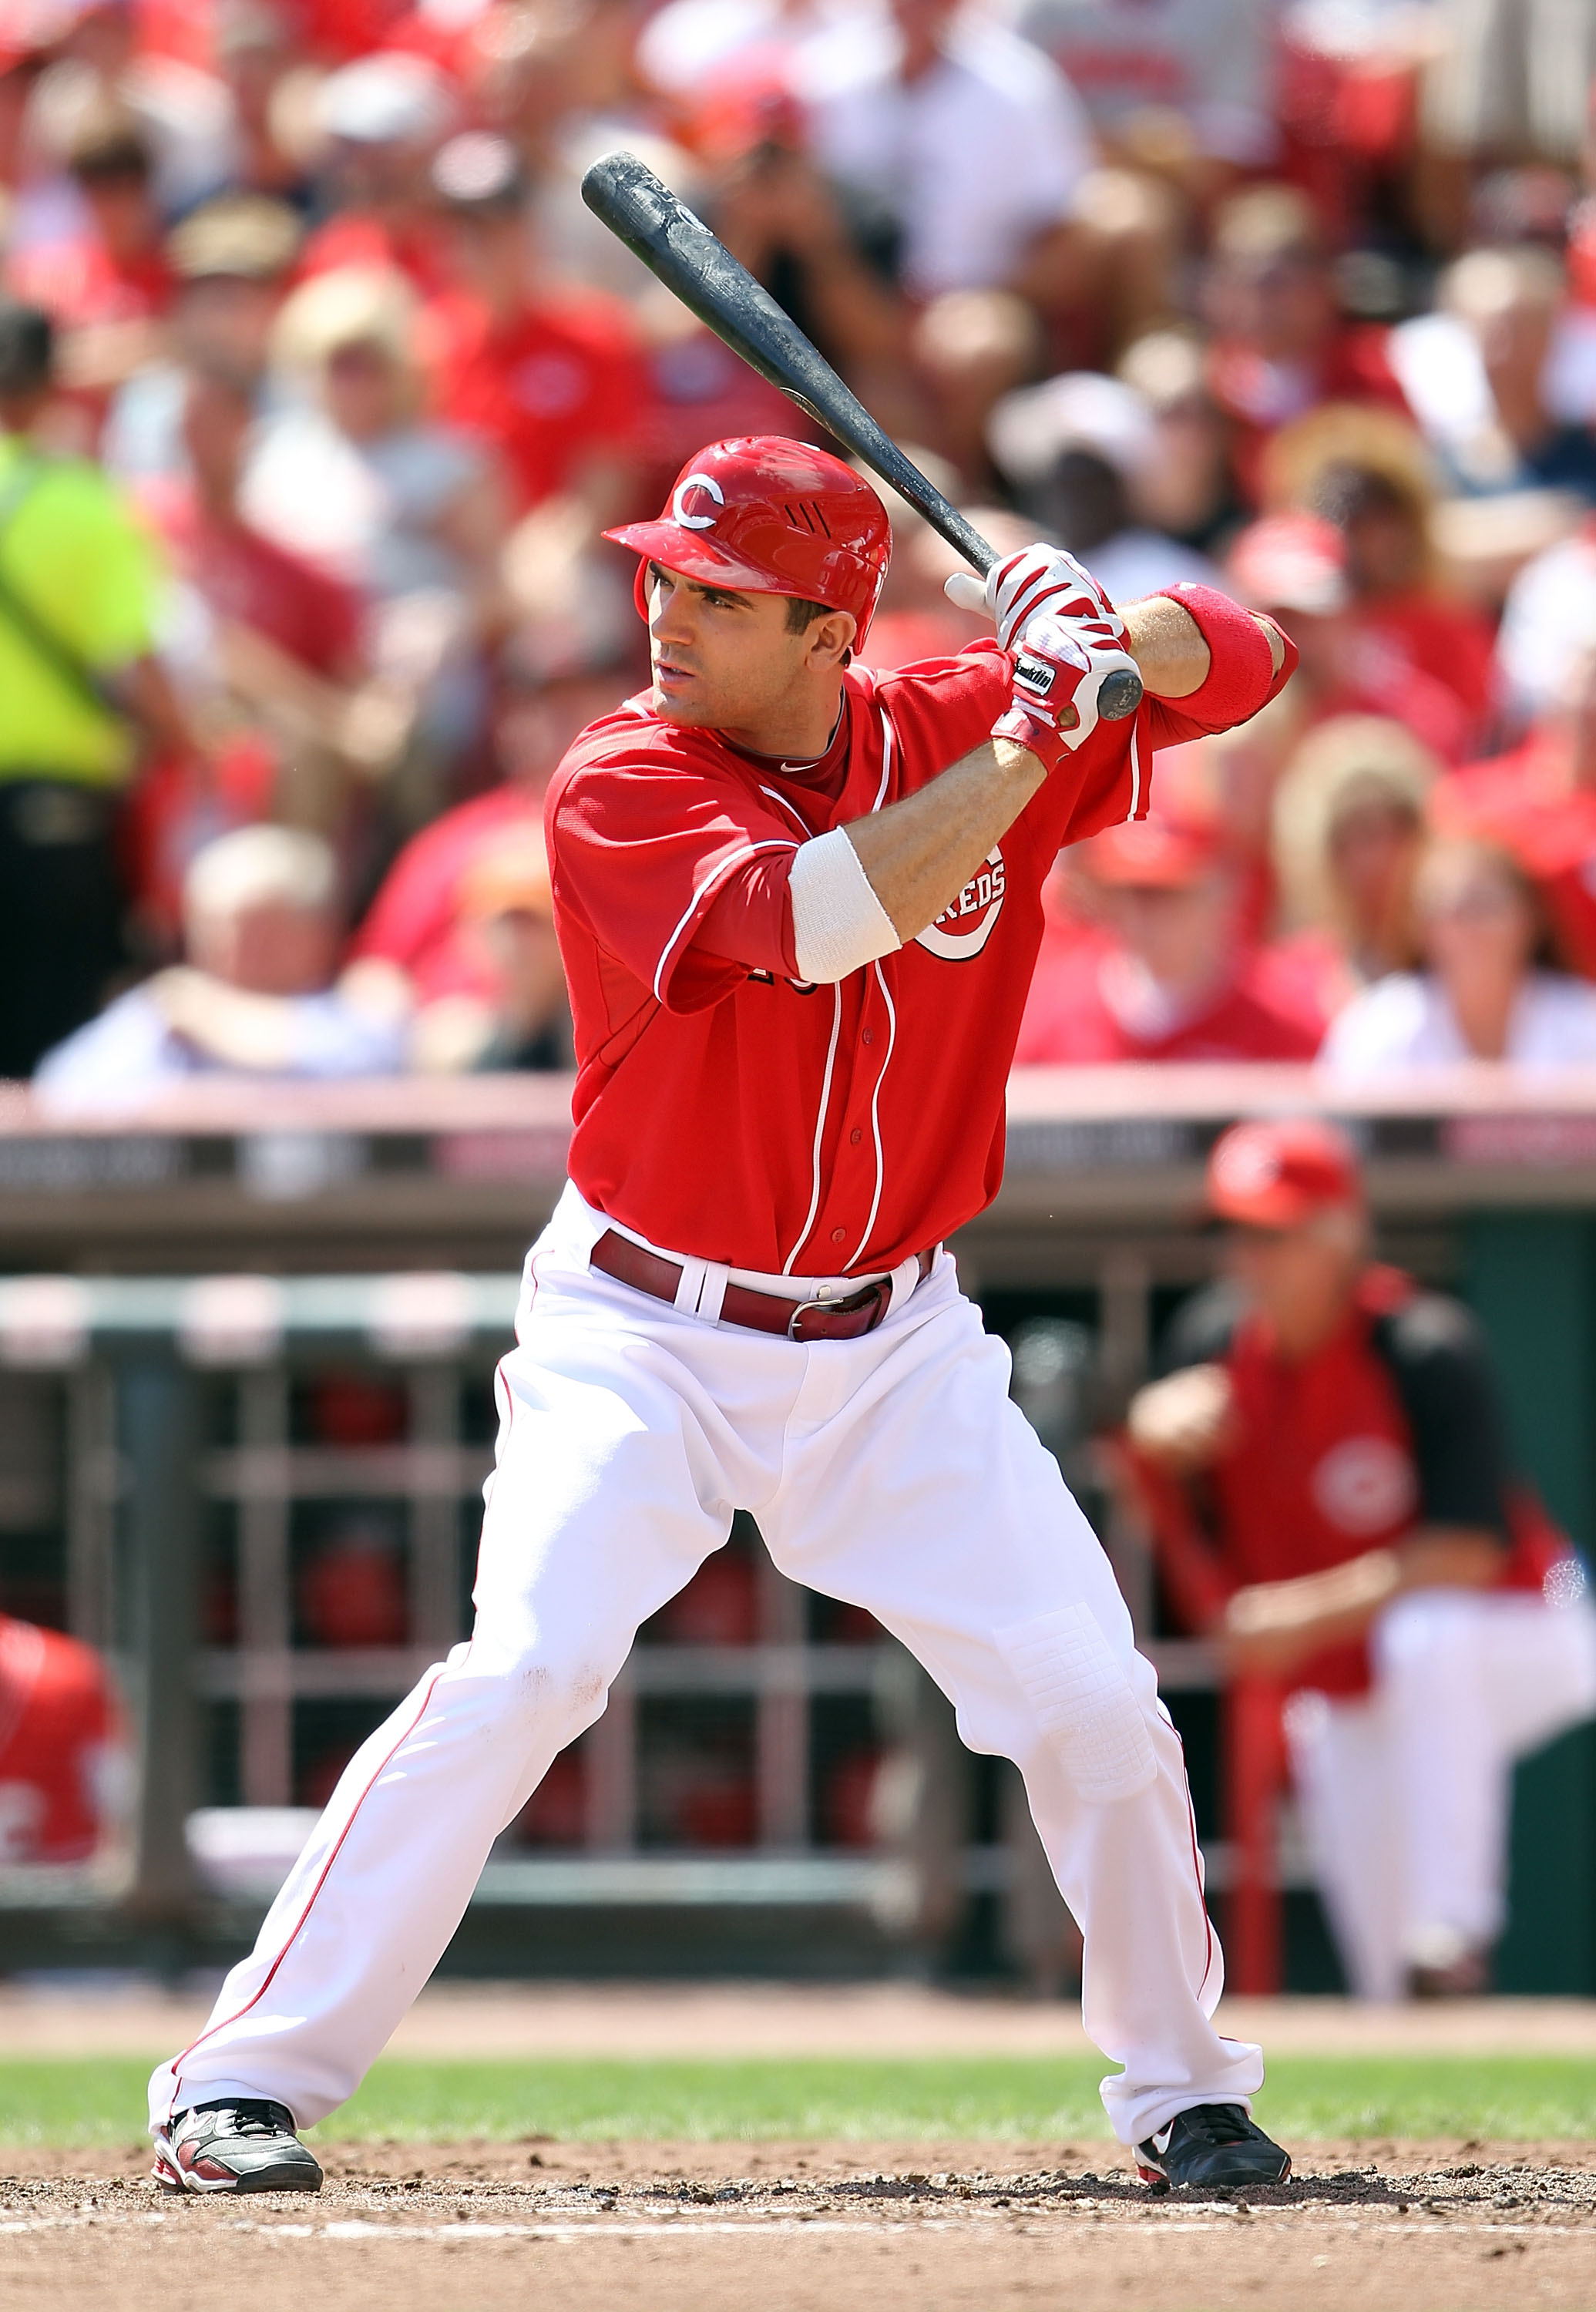 Joey Votto on X: I have a confession, I may have stayed up late a